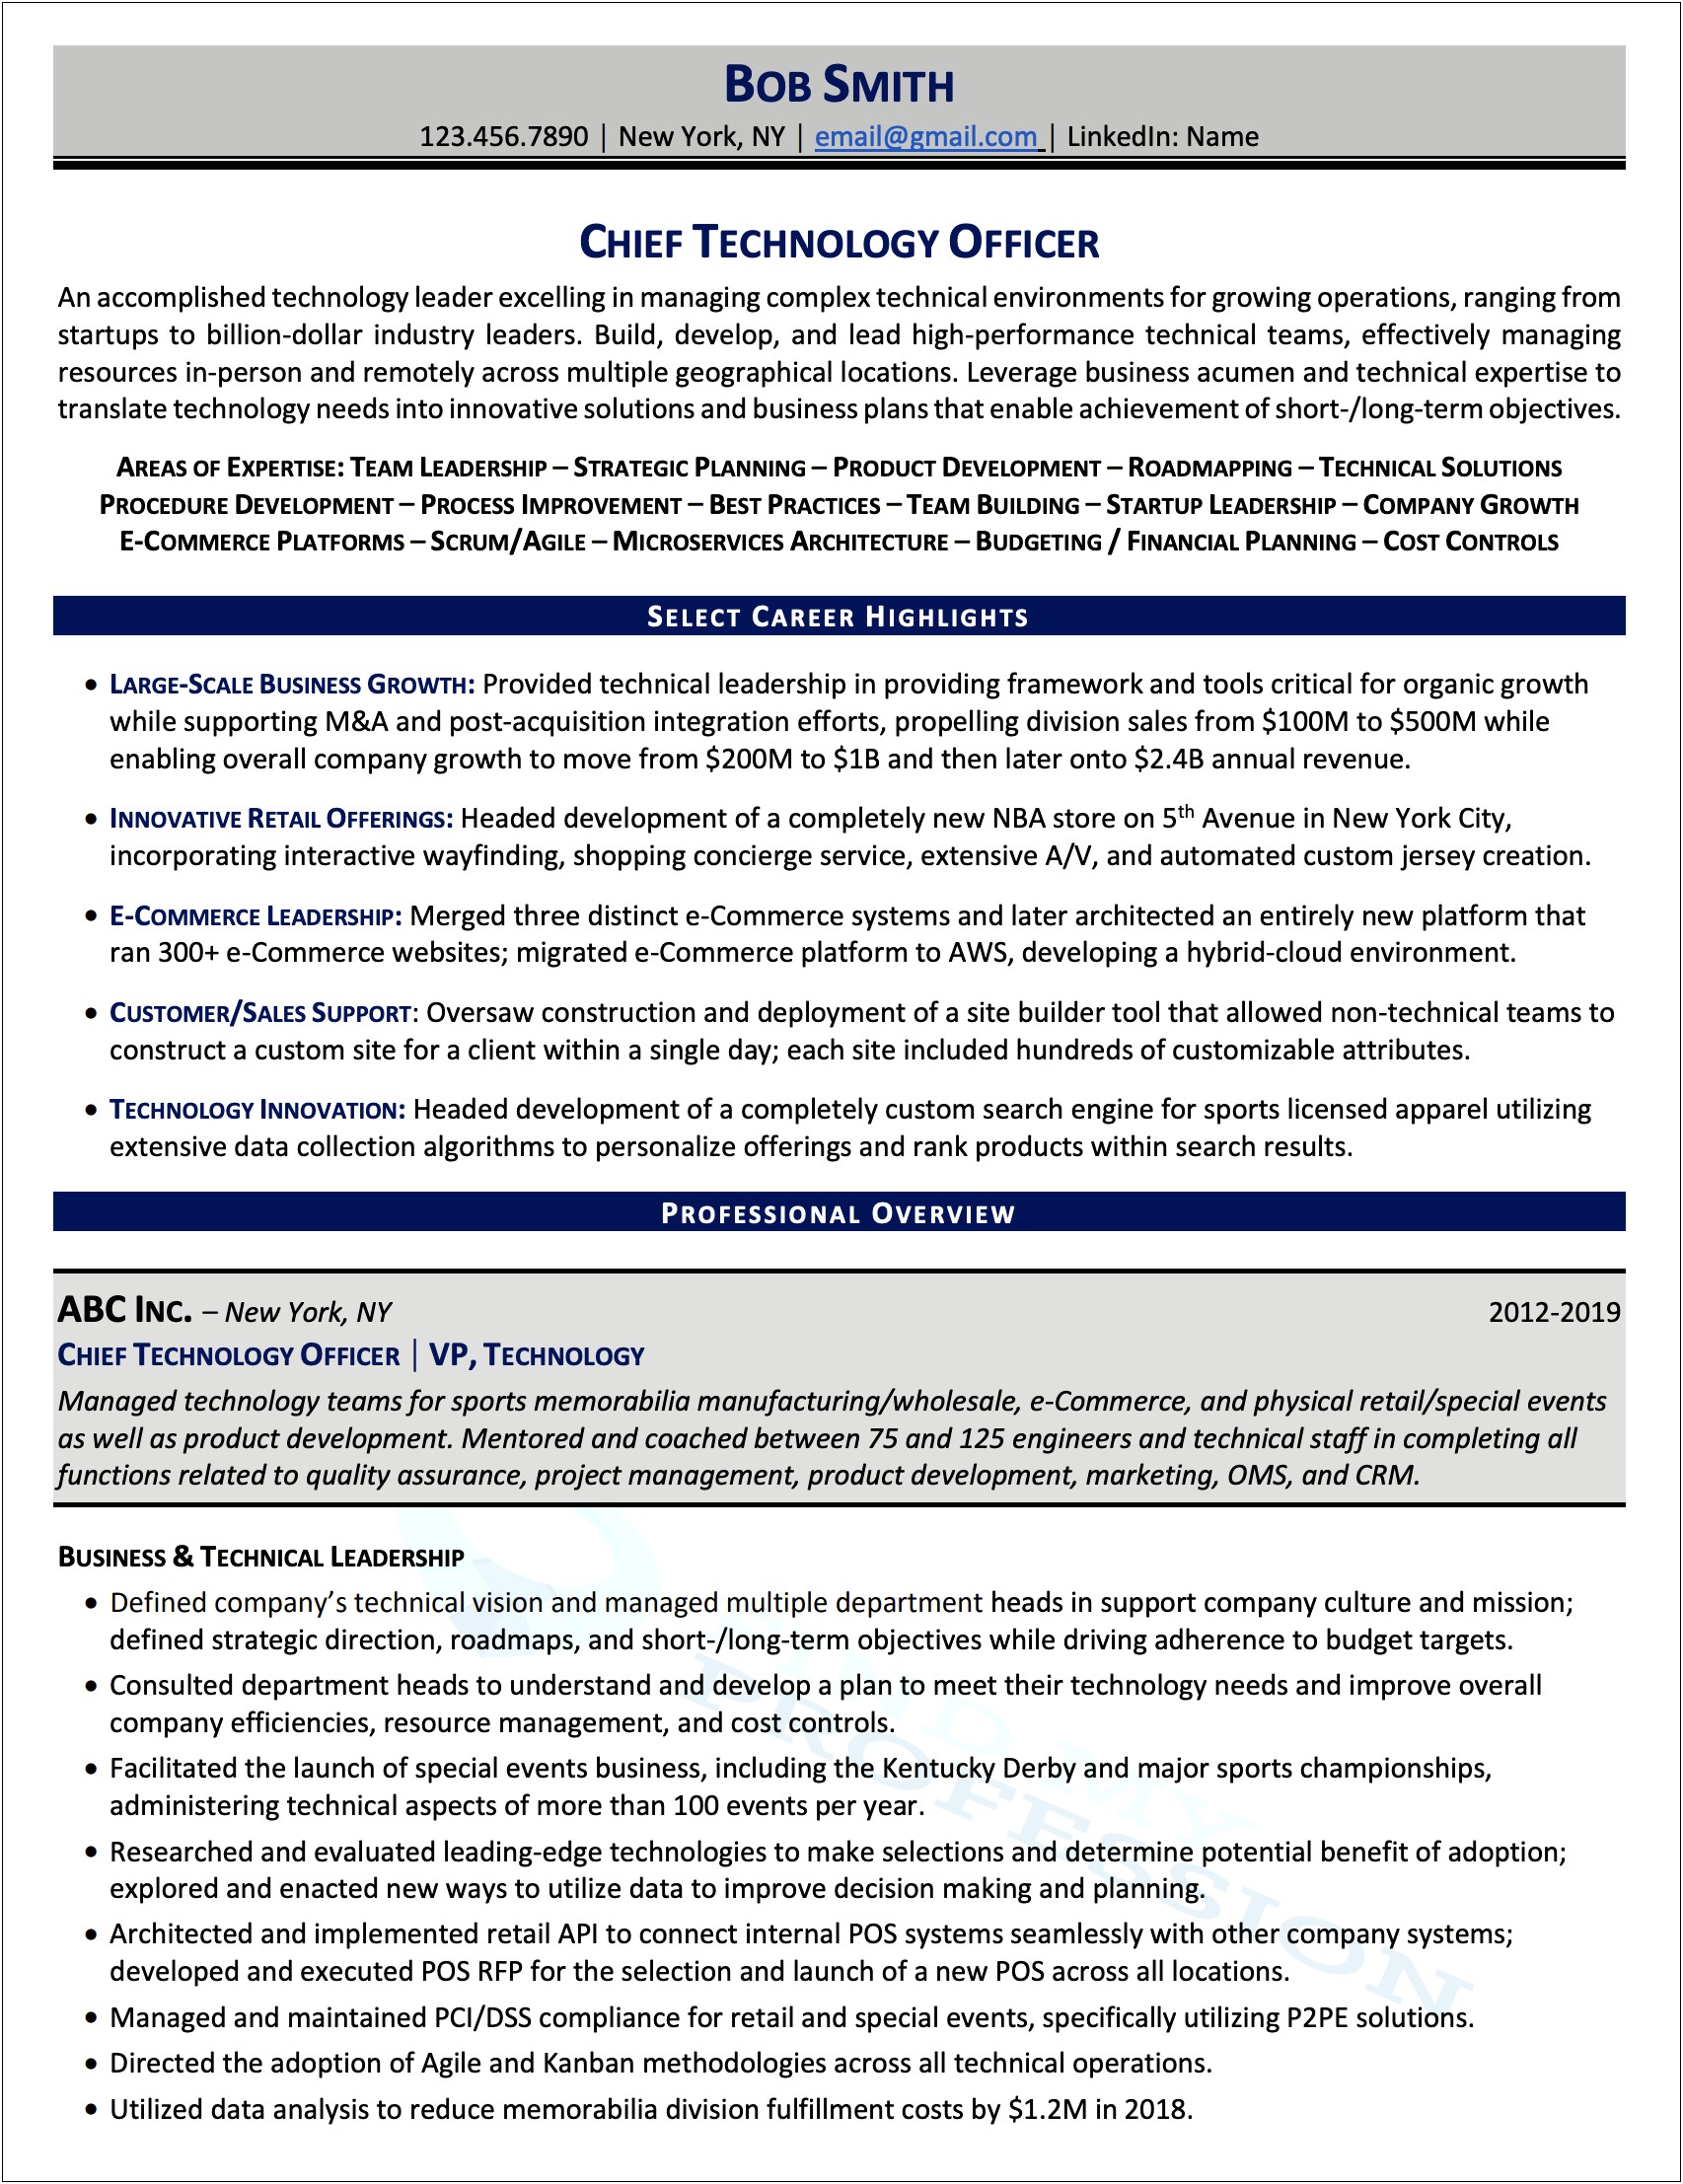 Chief Technology Officer Resume Examples